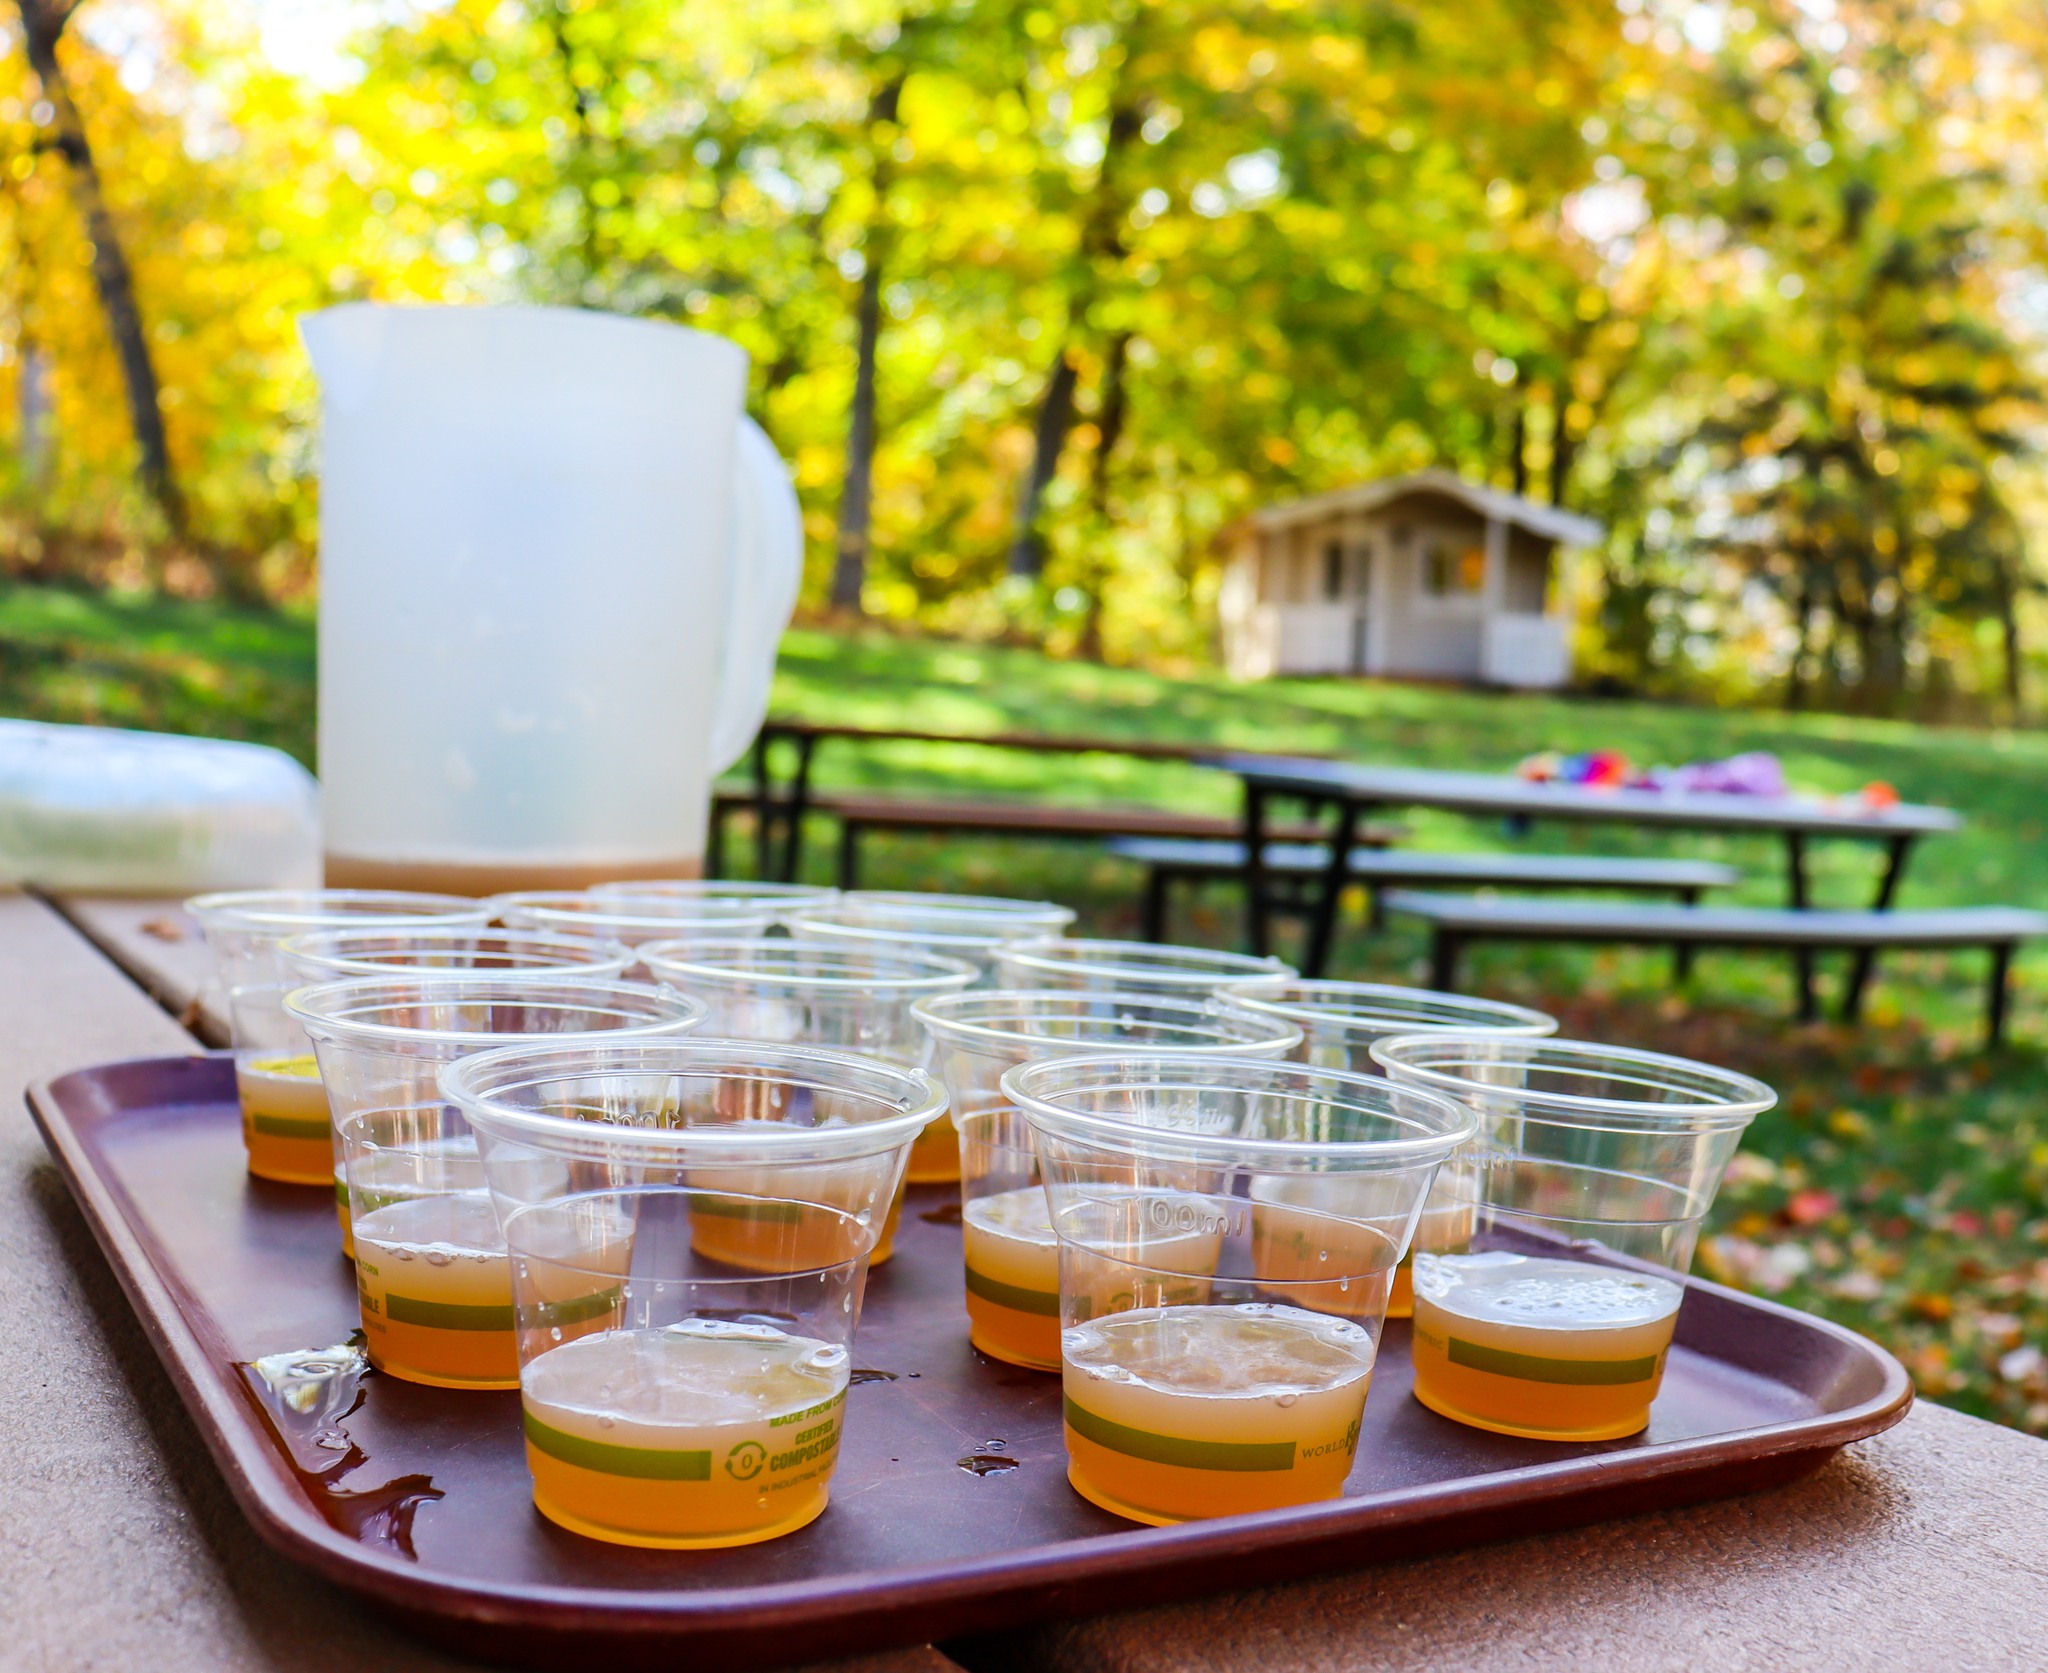 Cups of Apple Cider at Wargo Nature Center Fall Festival.